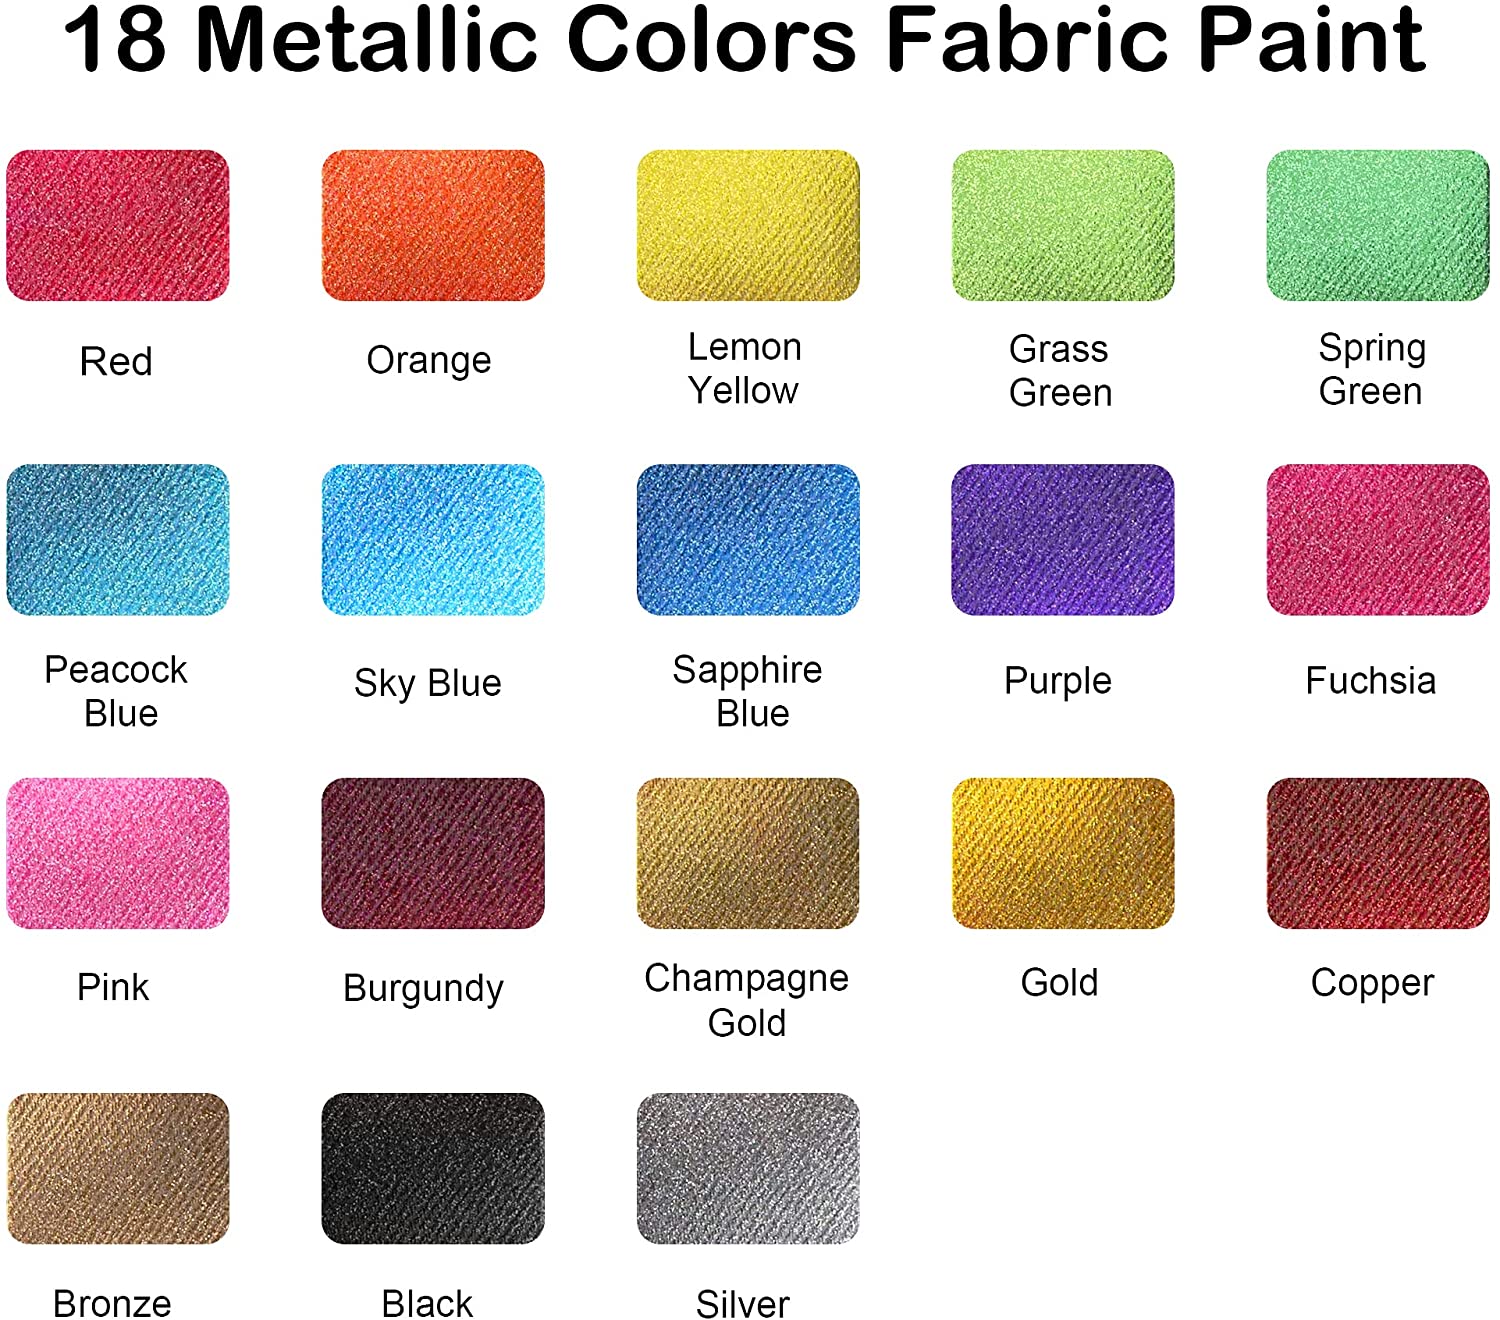 Metallic Fabric Paint, Shuttle Art 18 Metallic Colors Permanent Soft Fabric Paint in Bottles (60ml/2oz) with Brush and Stencils, Non-Toxic Textile